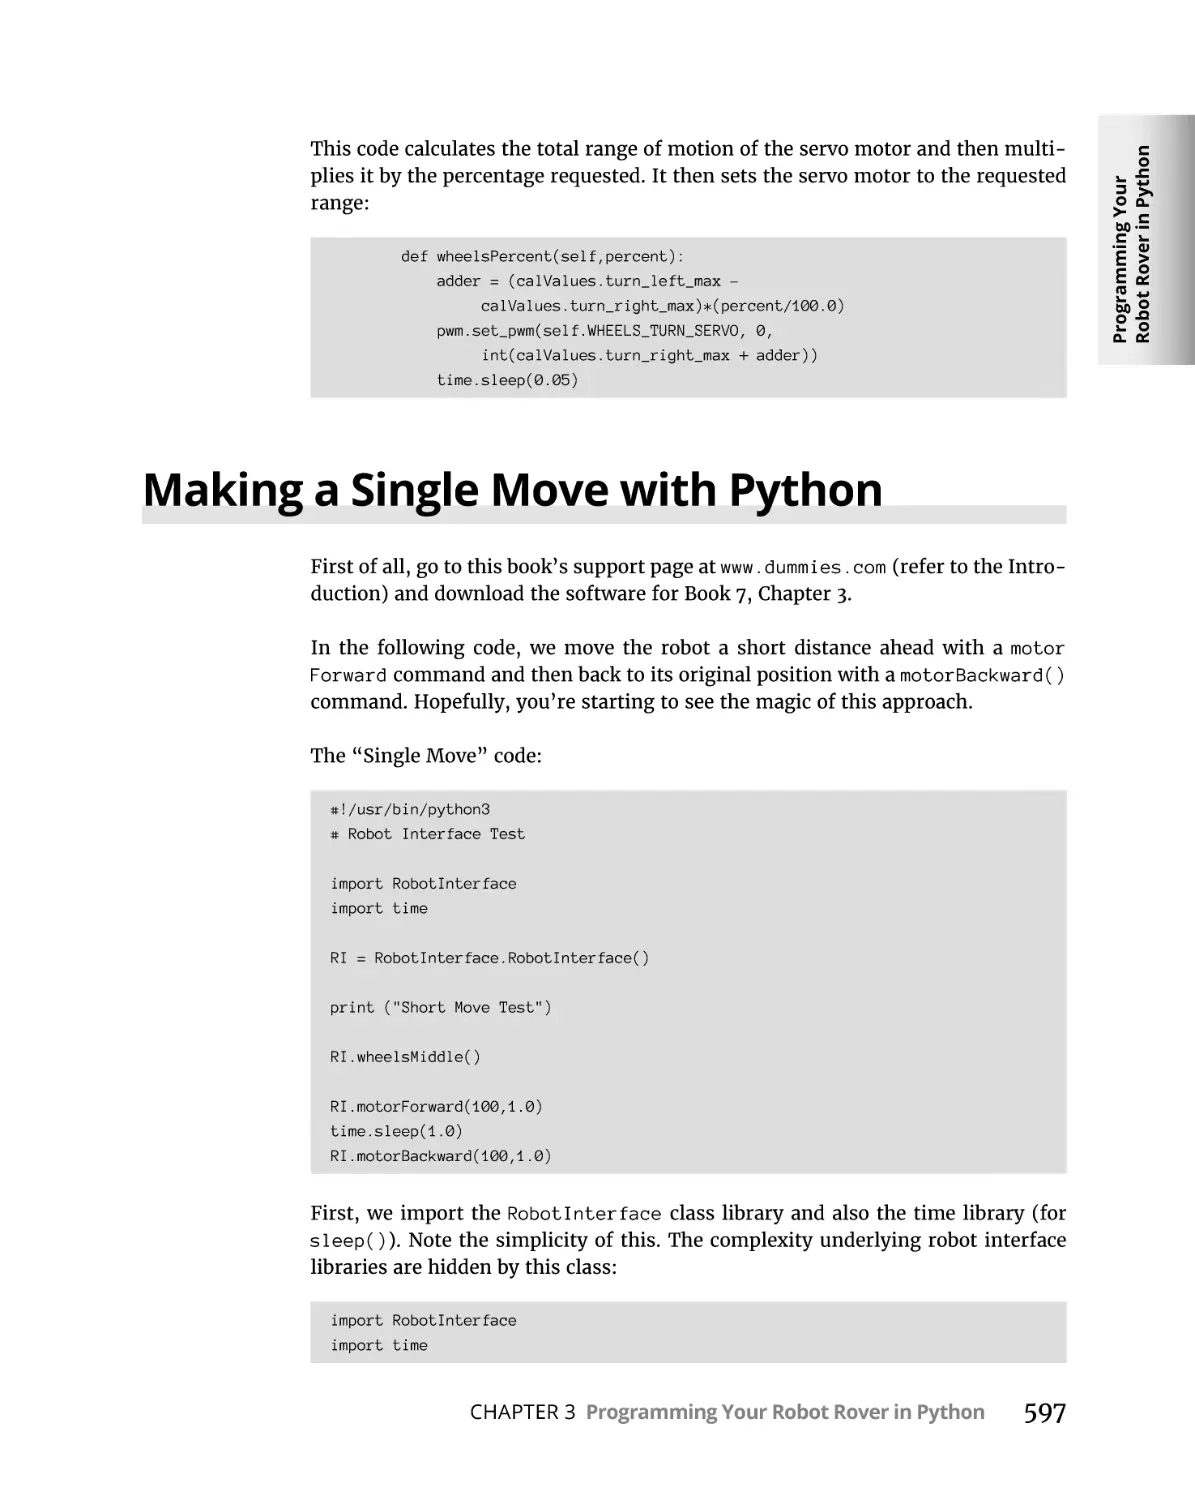 Making a Single Move with Python